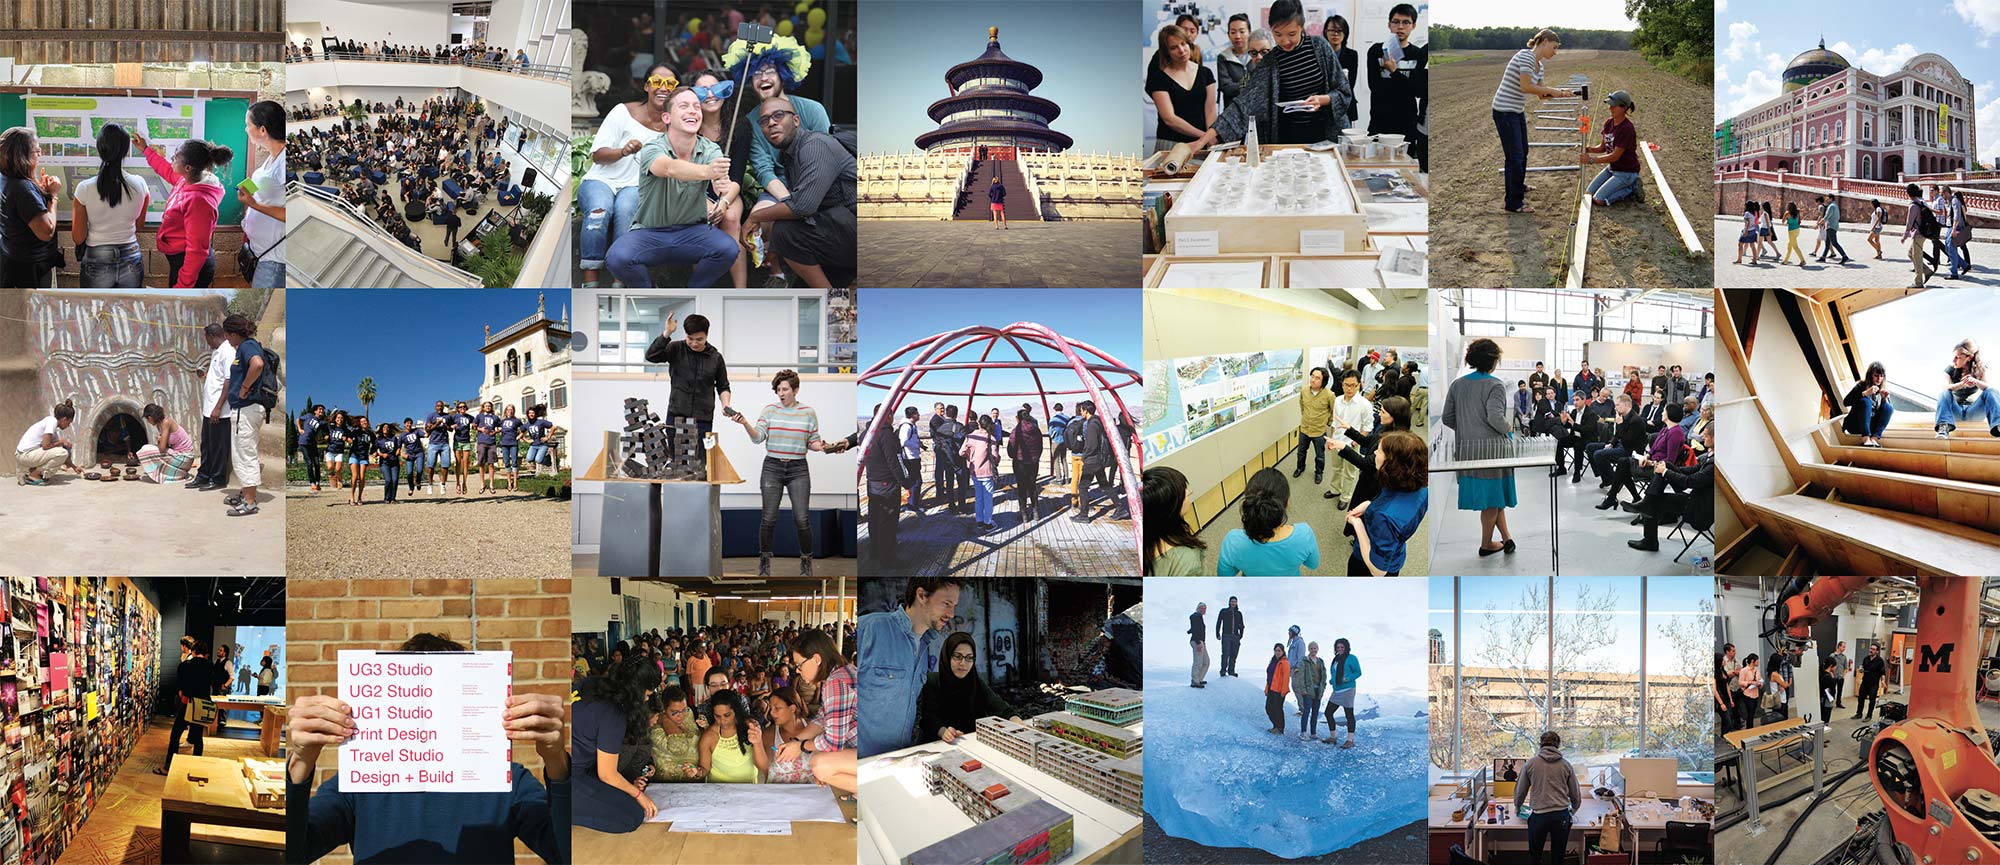 A collage of images depicting scenes from the last 25 years of Taubman College